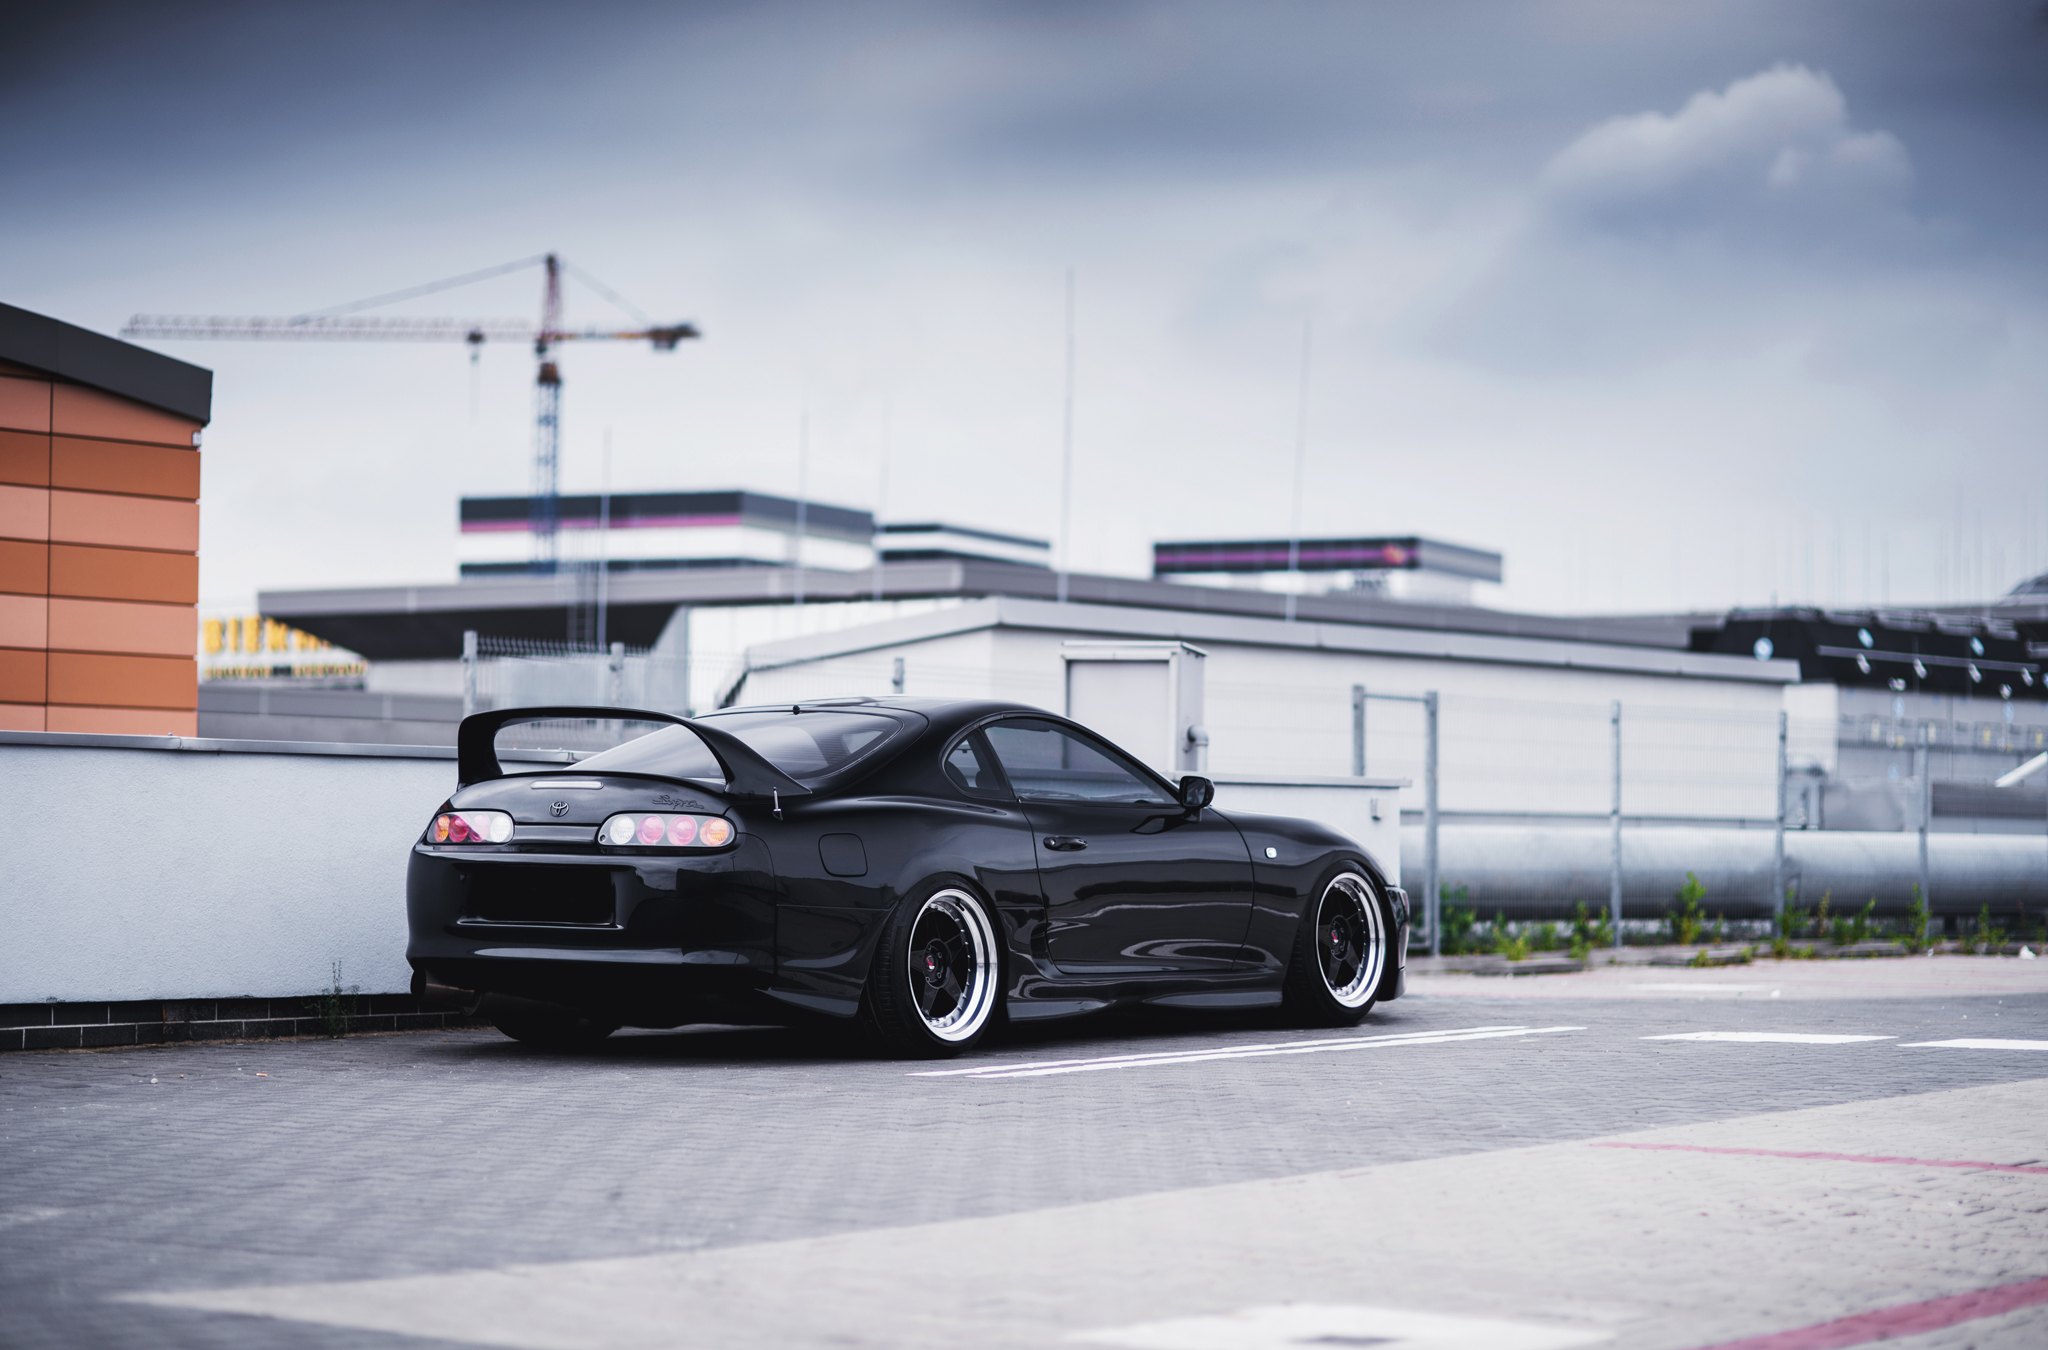 Aftermarket Rear Diffuser on Black Toyota Supra - Photo by JR Wheels